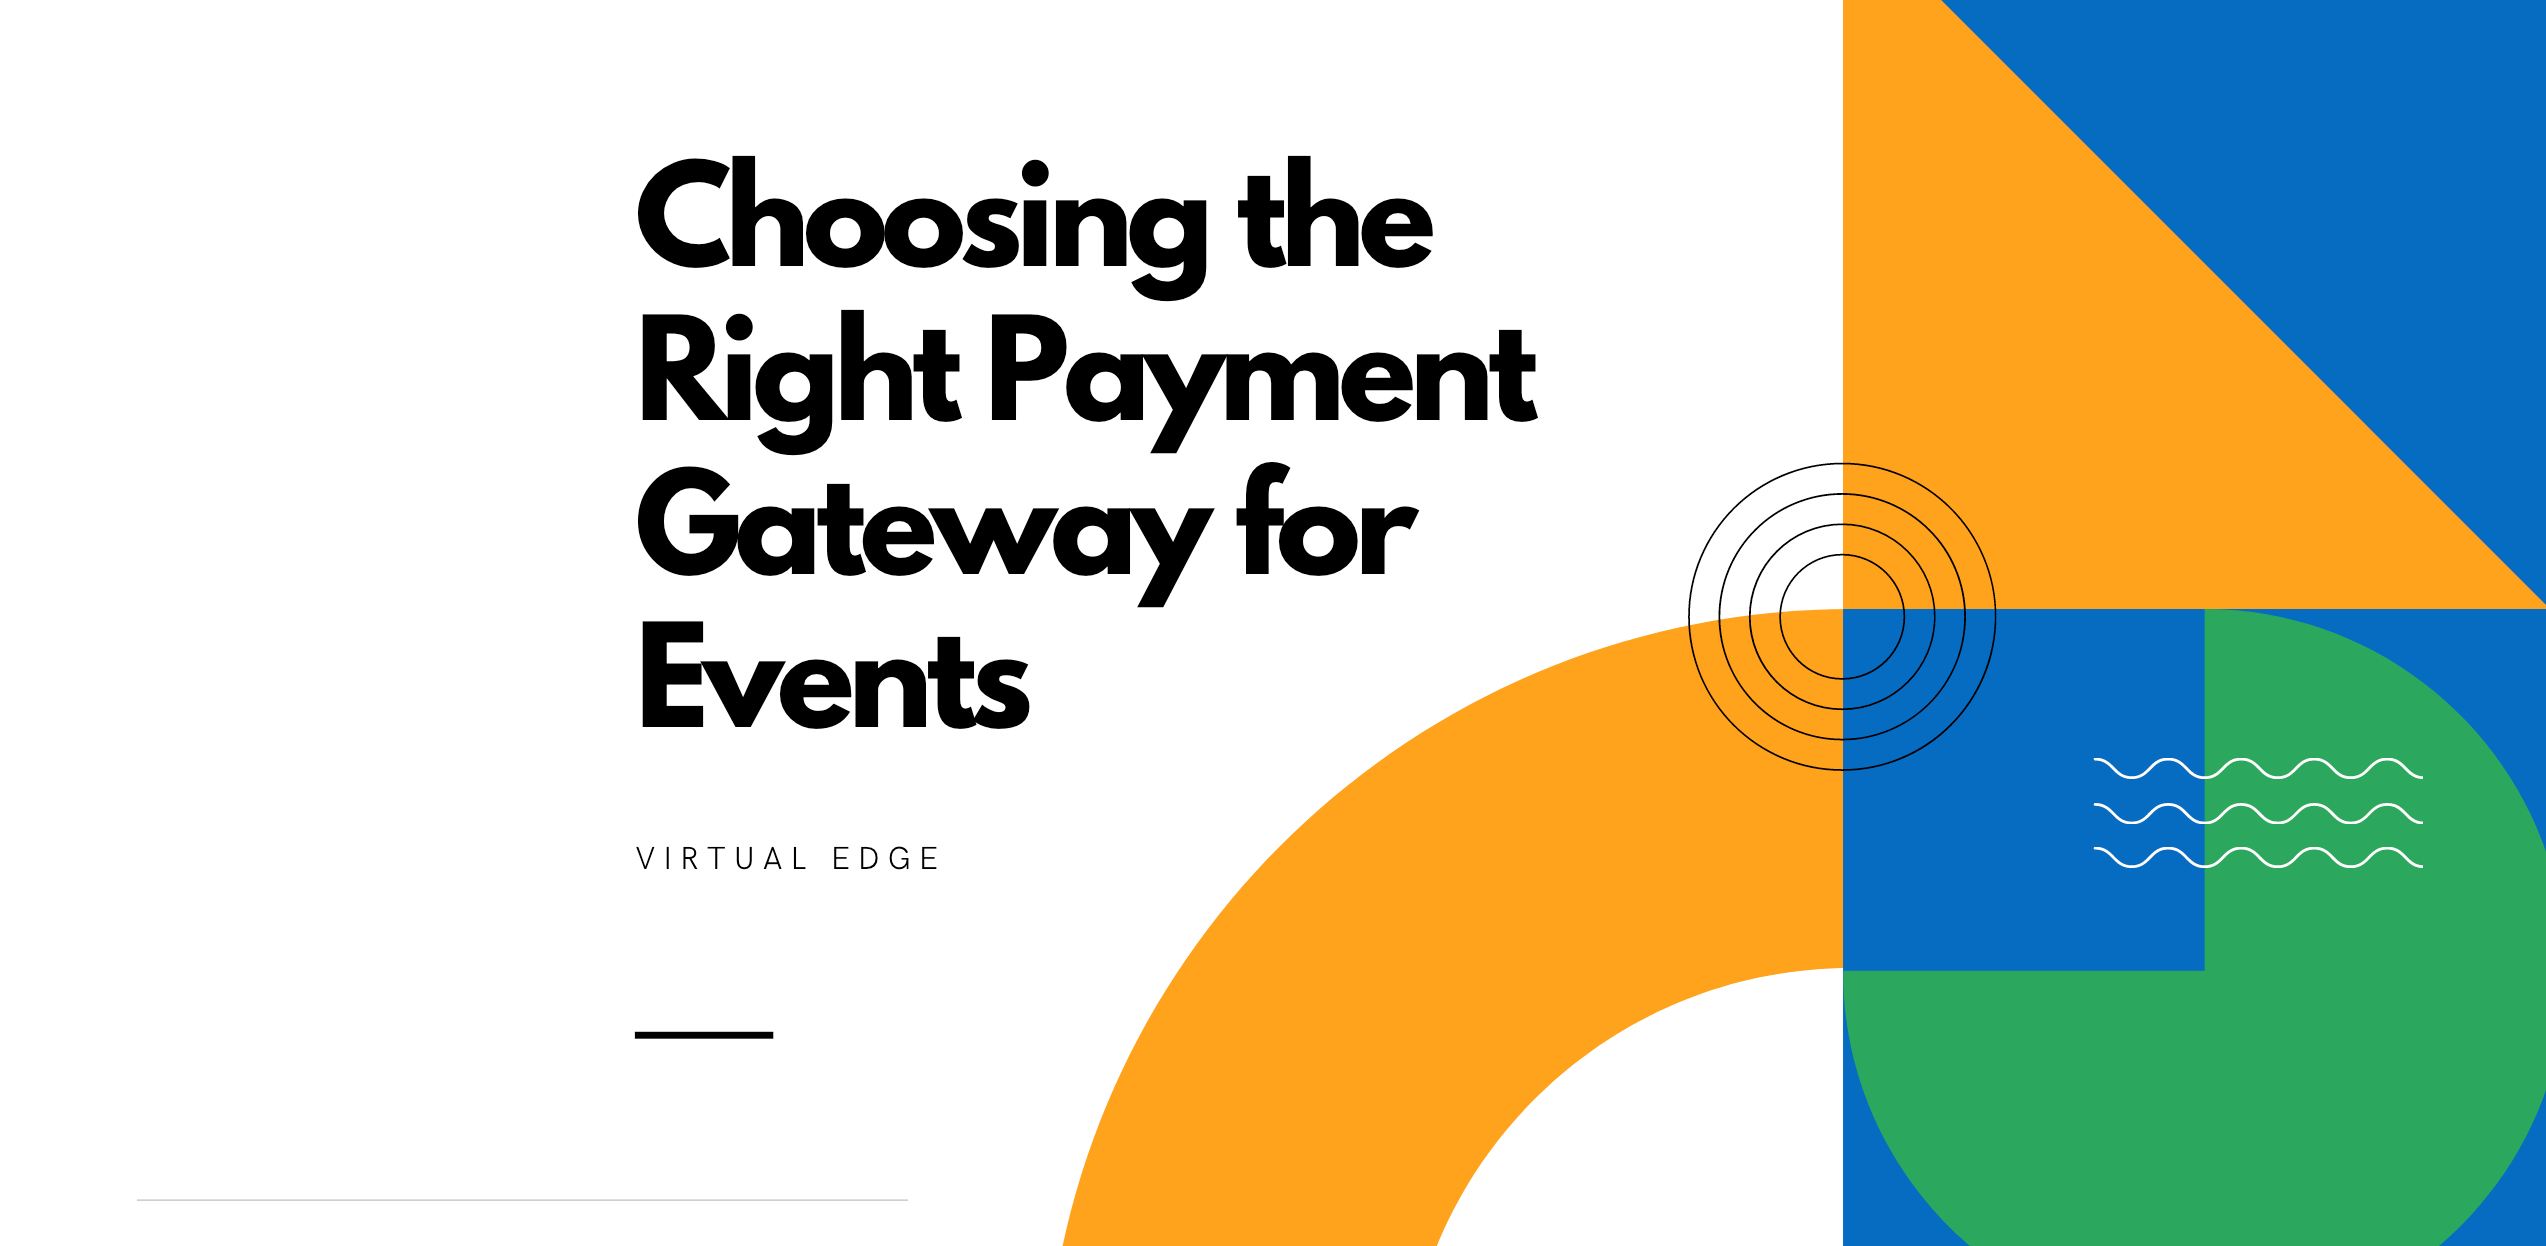 Choosing the Right Payment Gateway for Events